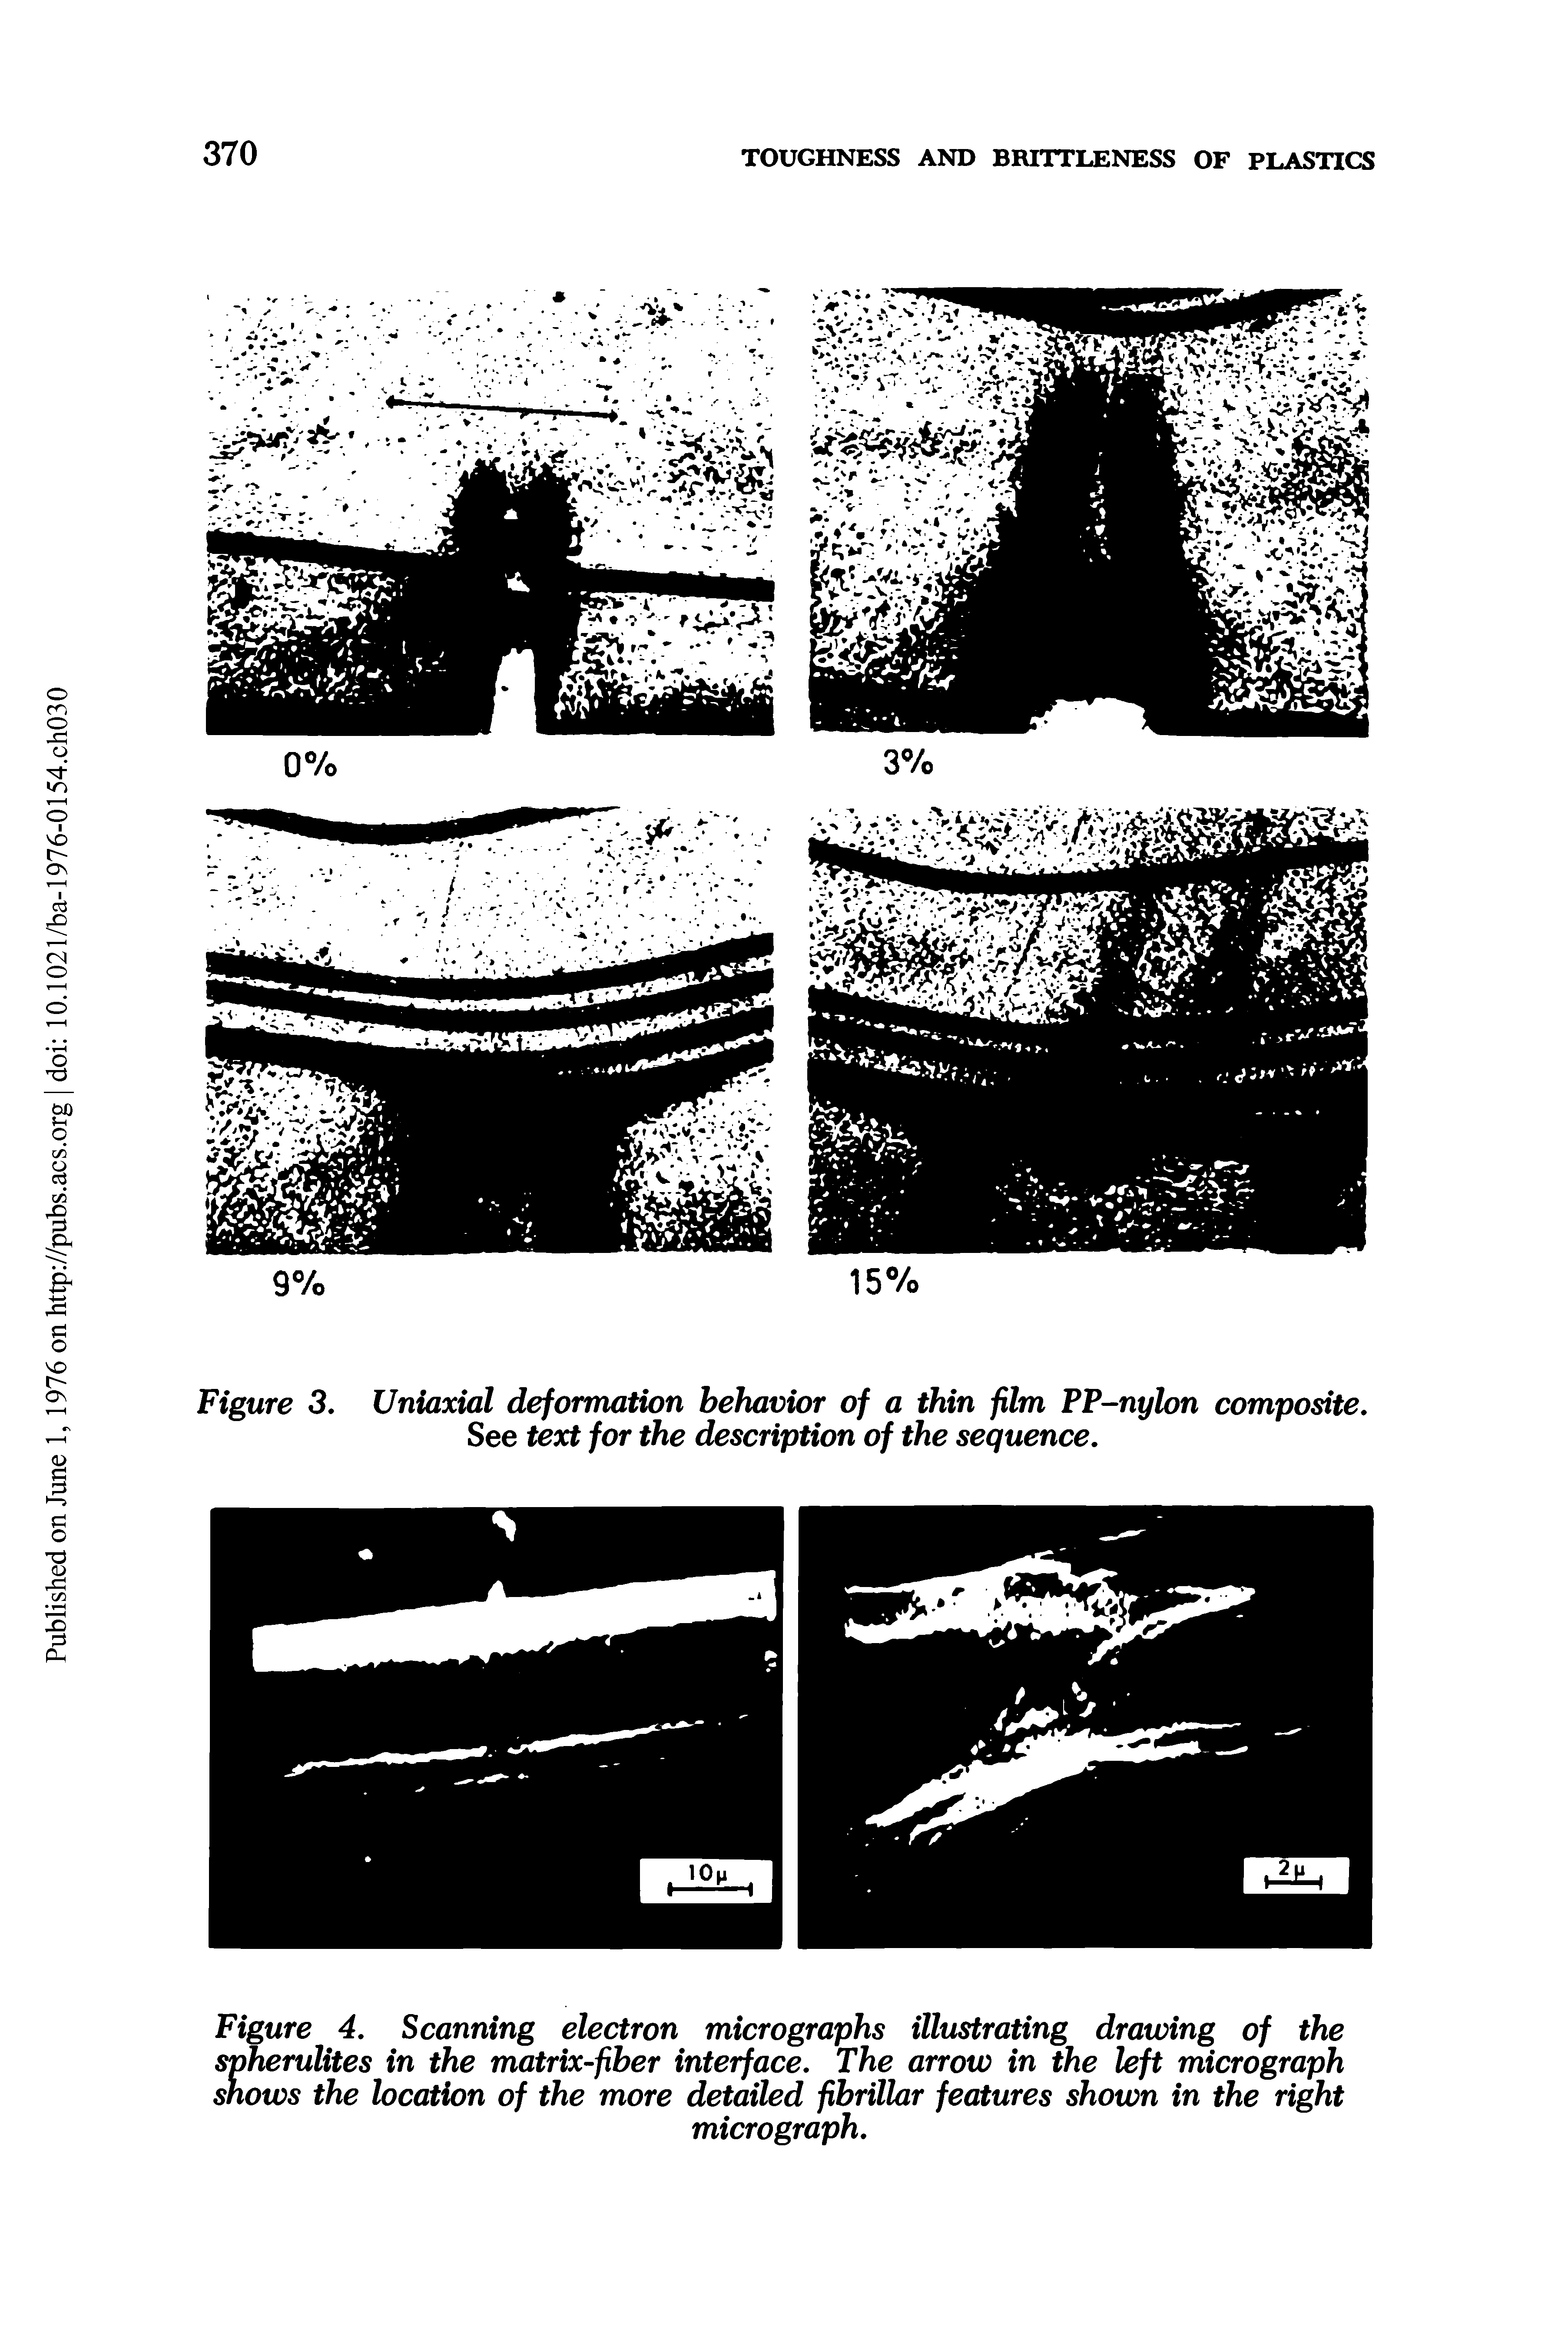 Figure 3. Uniaxial deformation behavior of a thin film PP-nylon composite. See text for the description of the sequence.